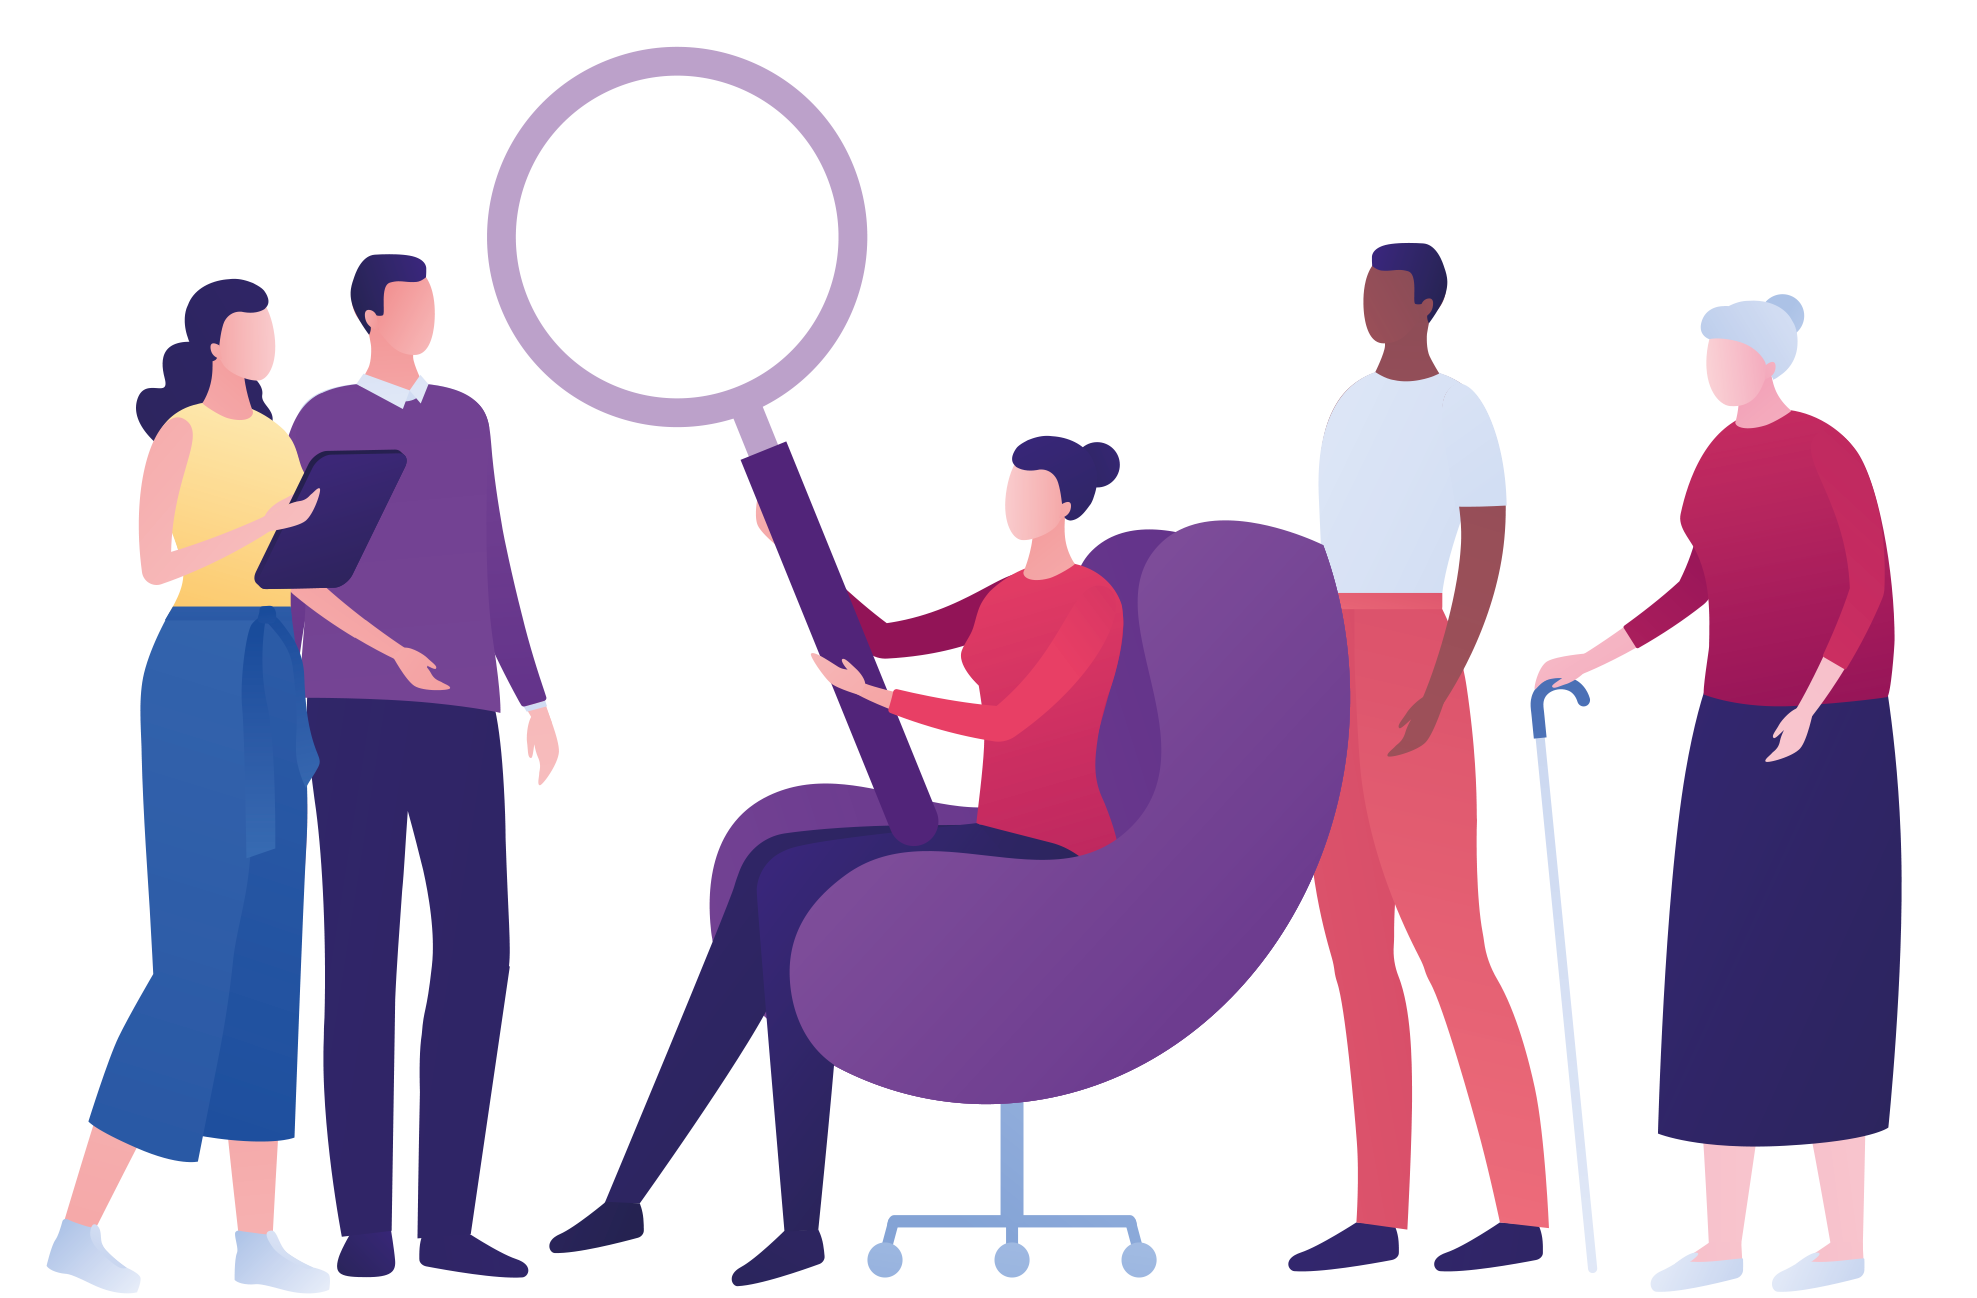 Illustration on people surrounding a woman sitting in a purple chair while she holds an oversized magnifying glass